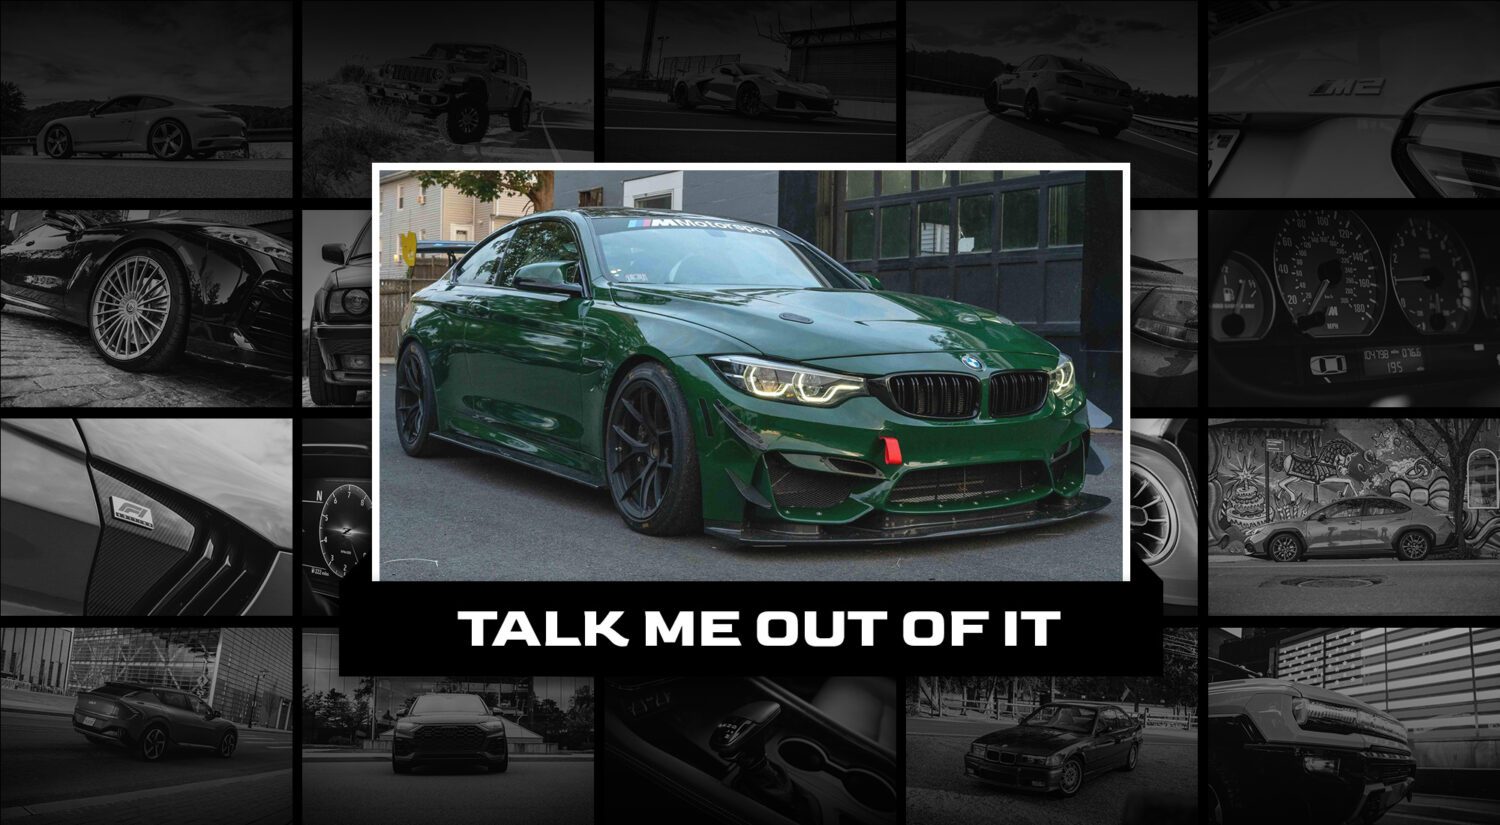 Buying the M4 of someone else's dreams